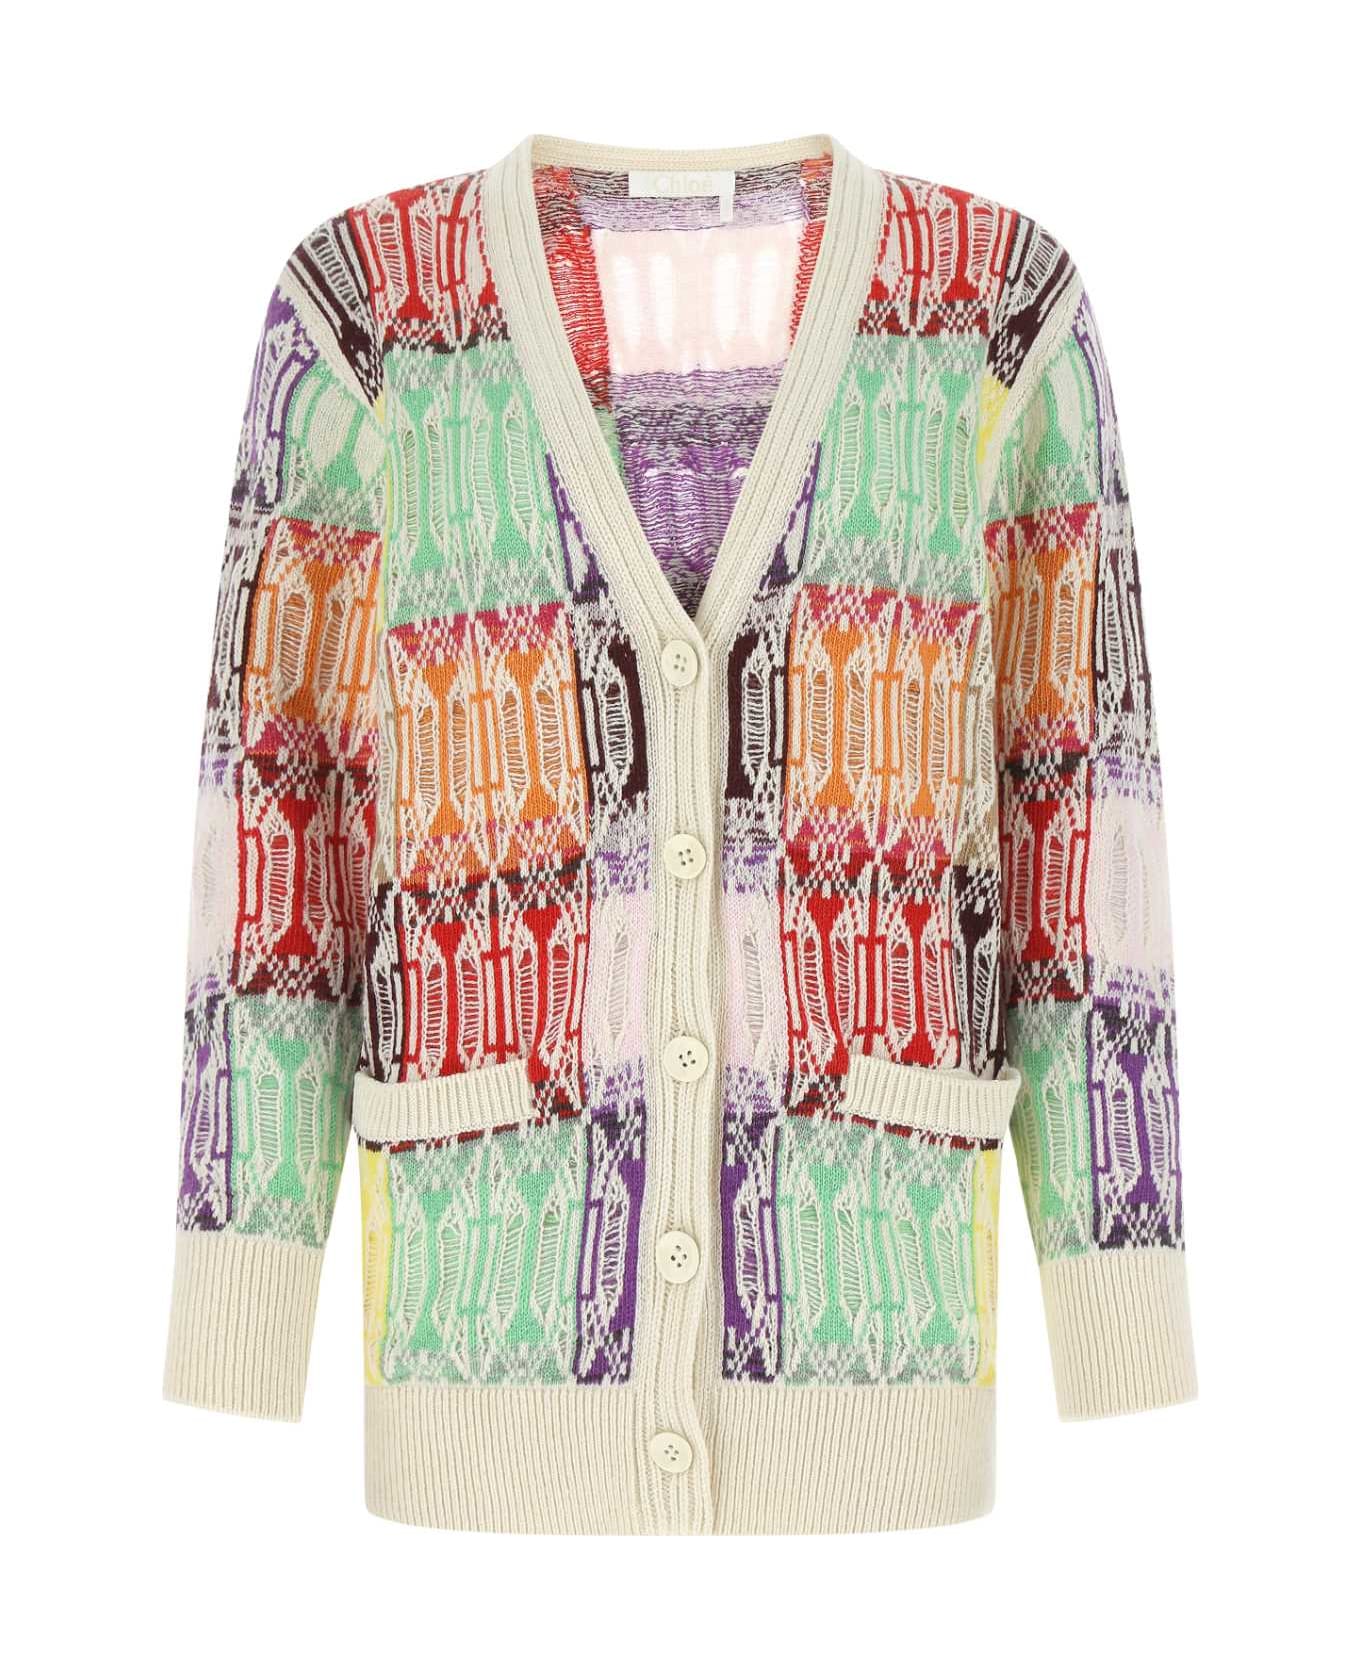 Chloé Embroidered Cashmere Blend Cardigan - 9CA